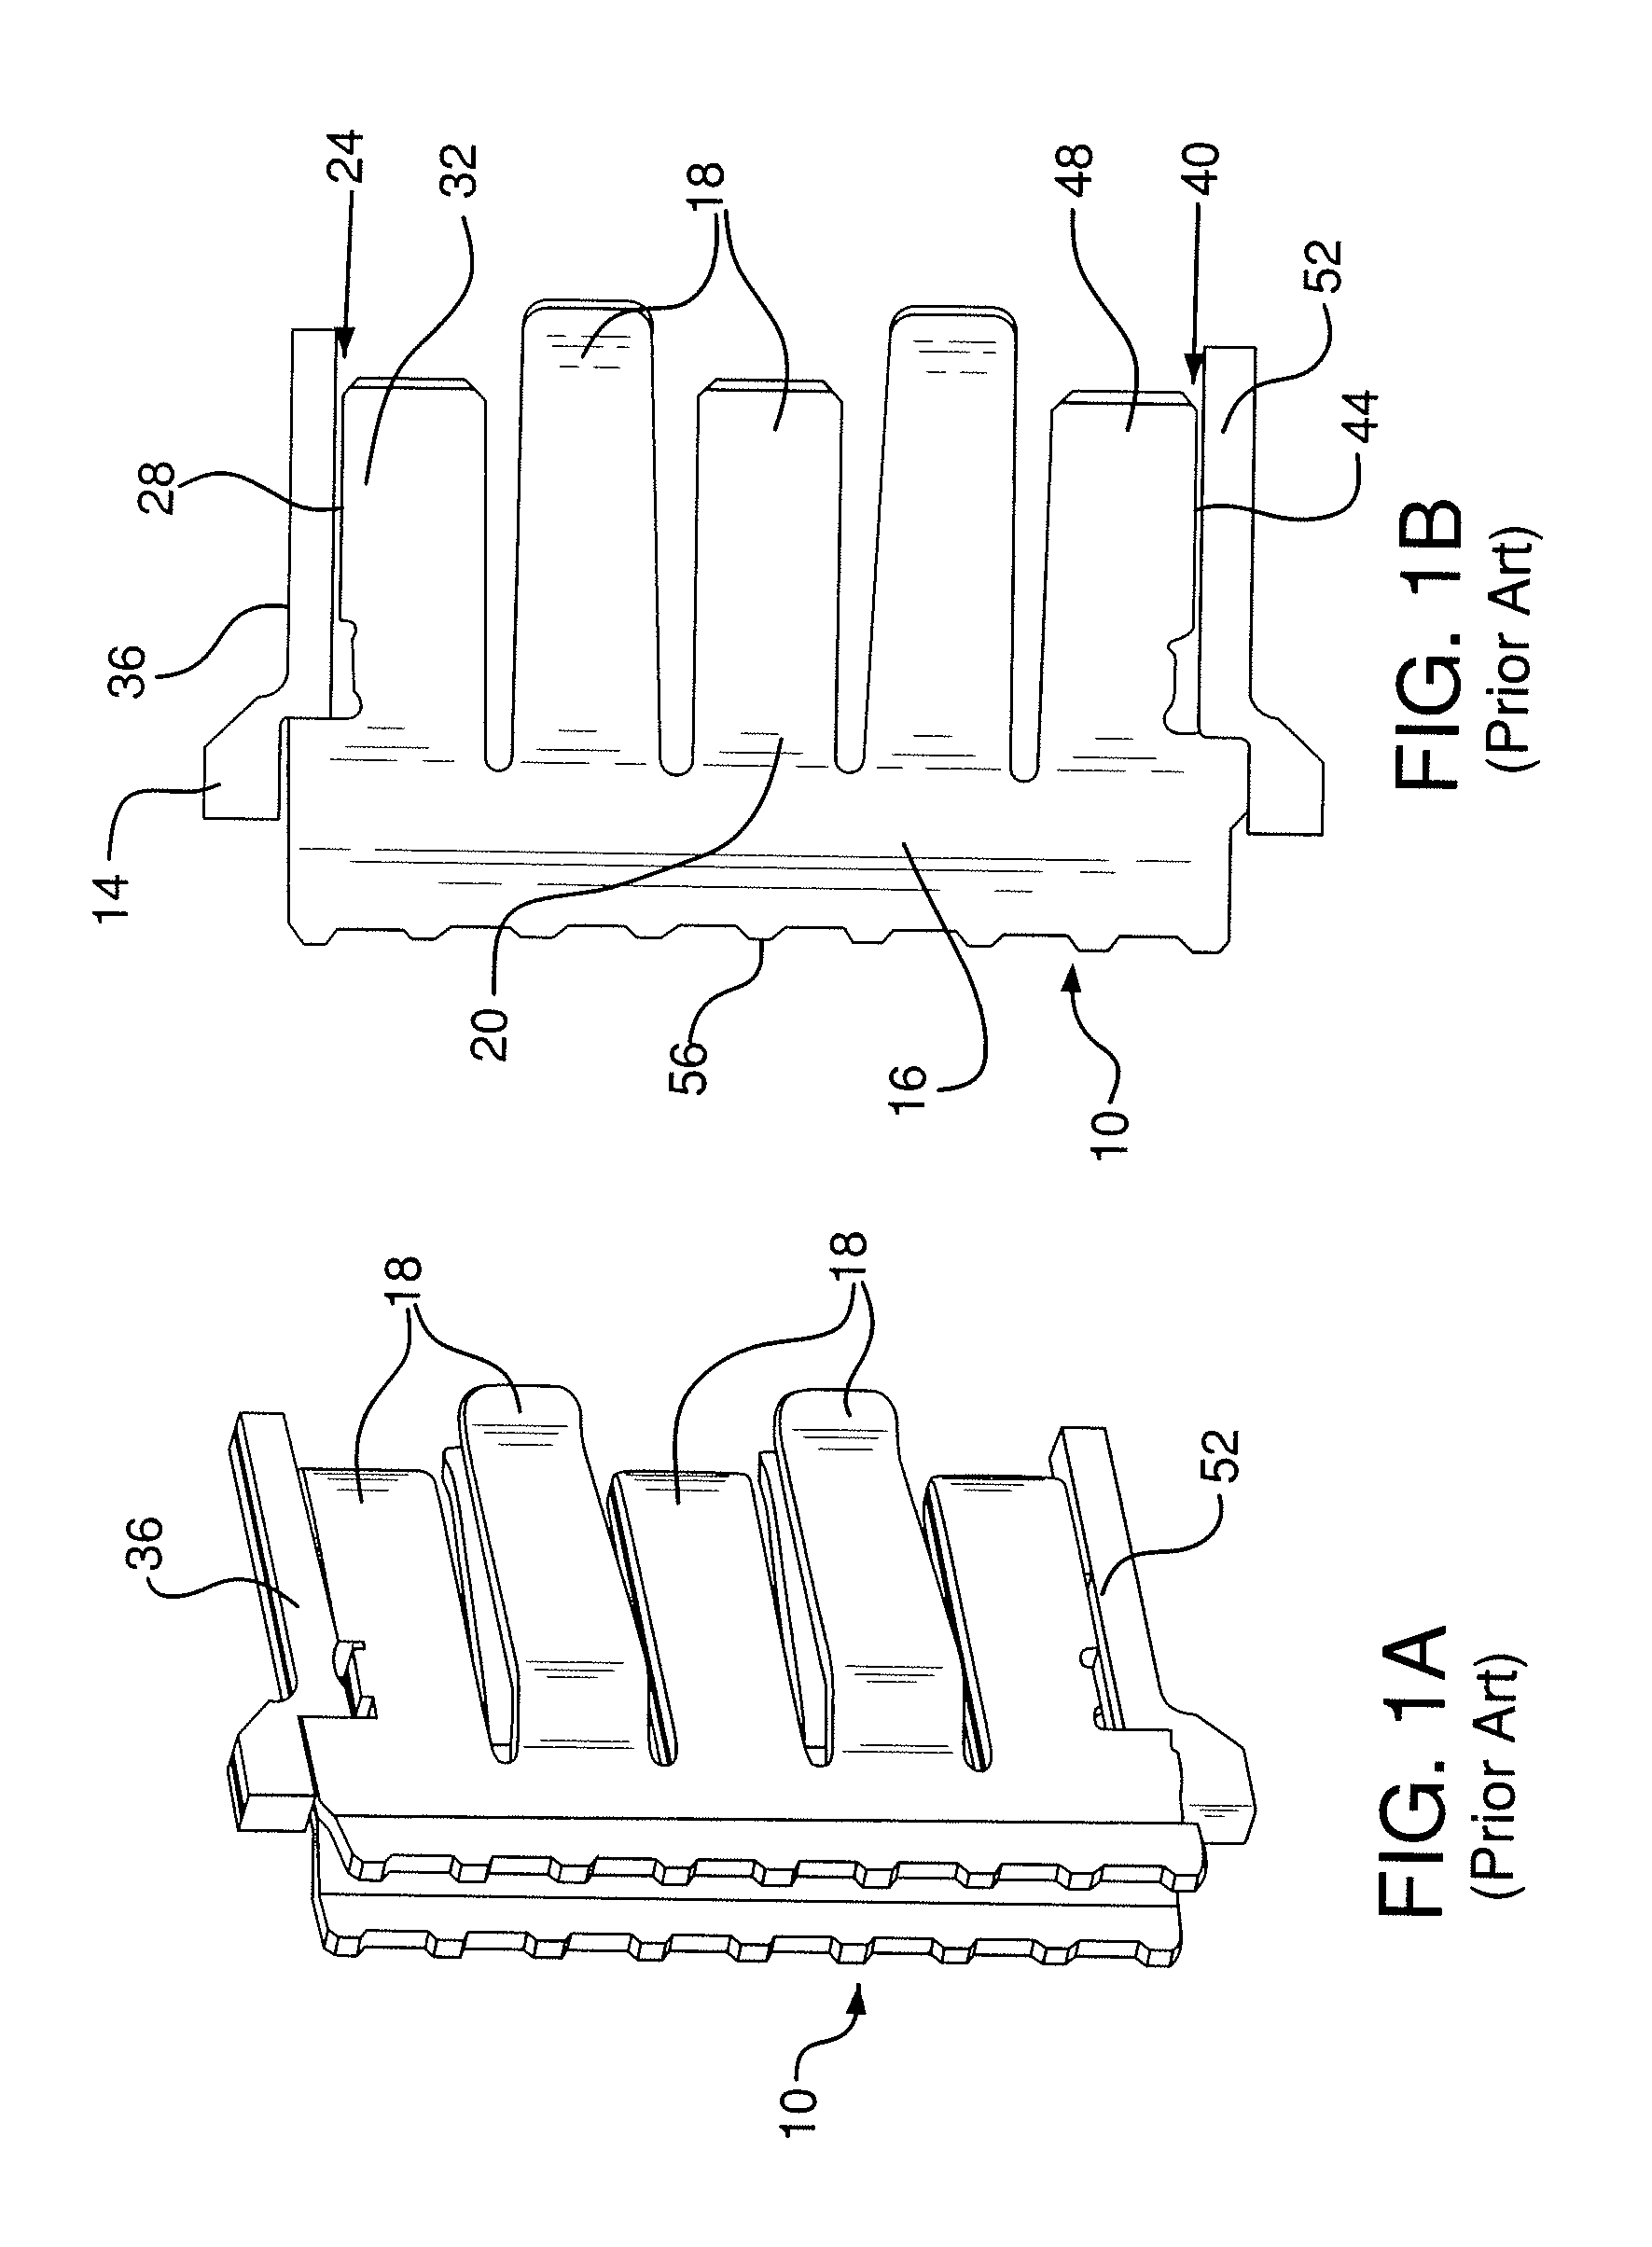 Electrical connector with stress-distribution features